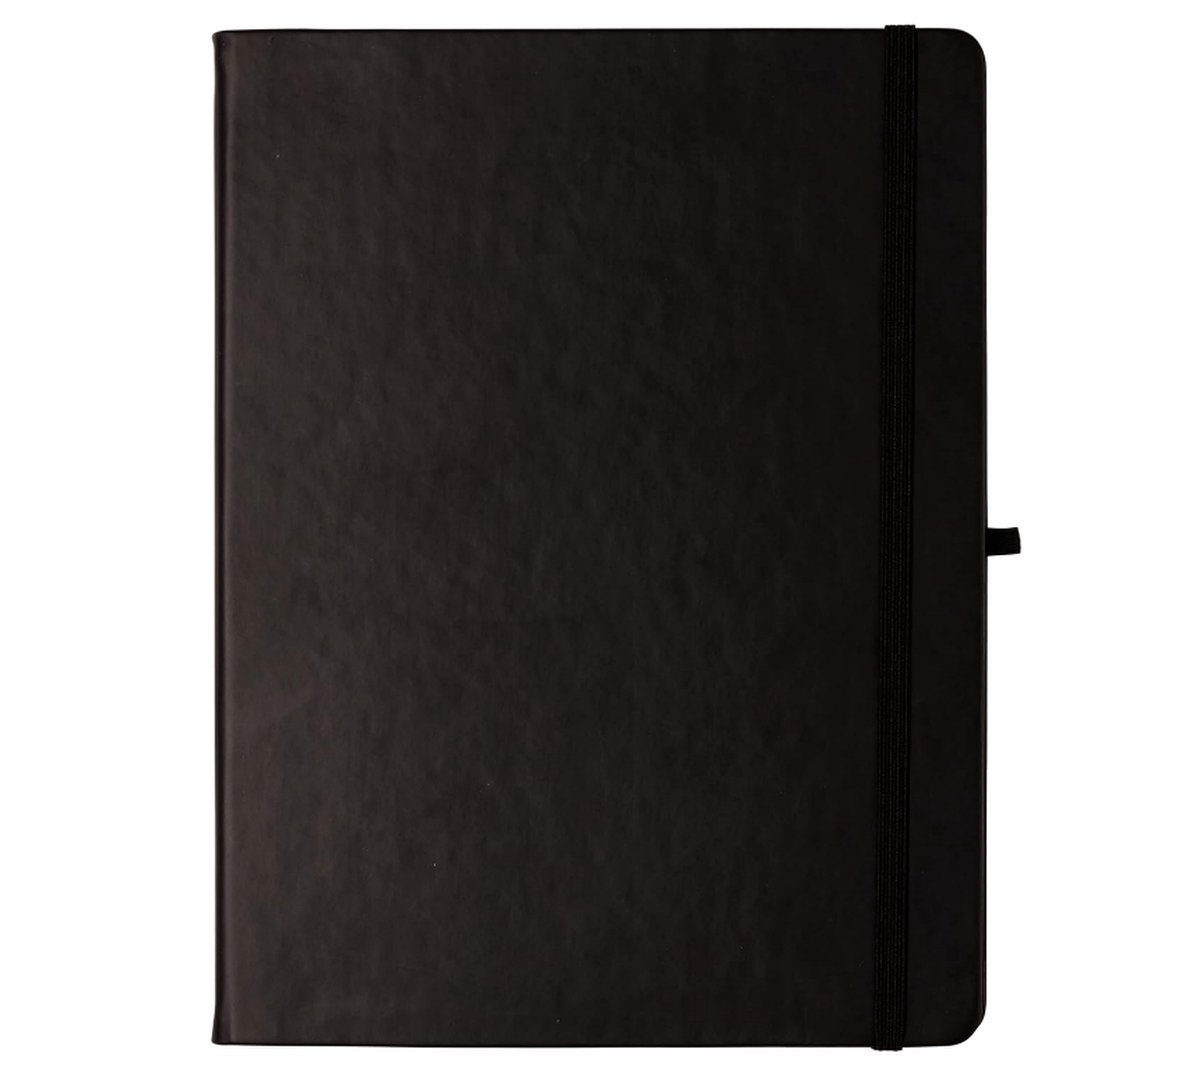 Eccolo Hardbound Writing Journal, Cool Jazz, 192 Pages of White Lined Paper with Elastic Band Closure, Lay Flat Design, Interior Gusset Pocket and Double Bookmarks (Black, 25.4 x 17.78 x 2.54 cm; 453.59 Grams)